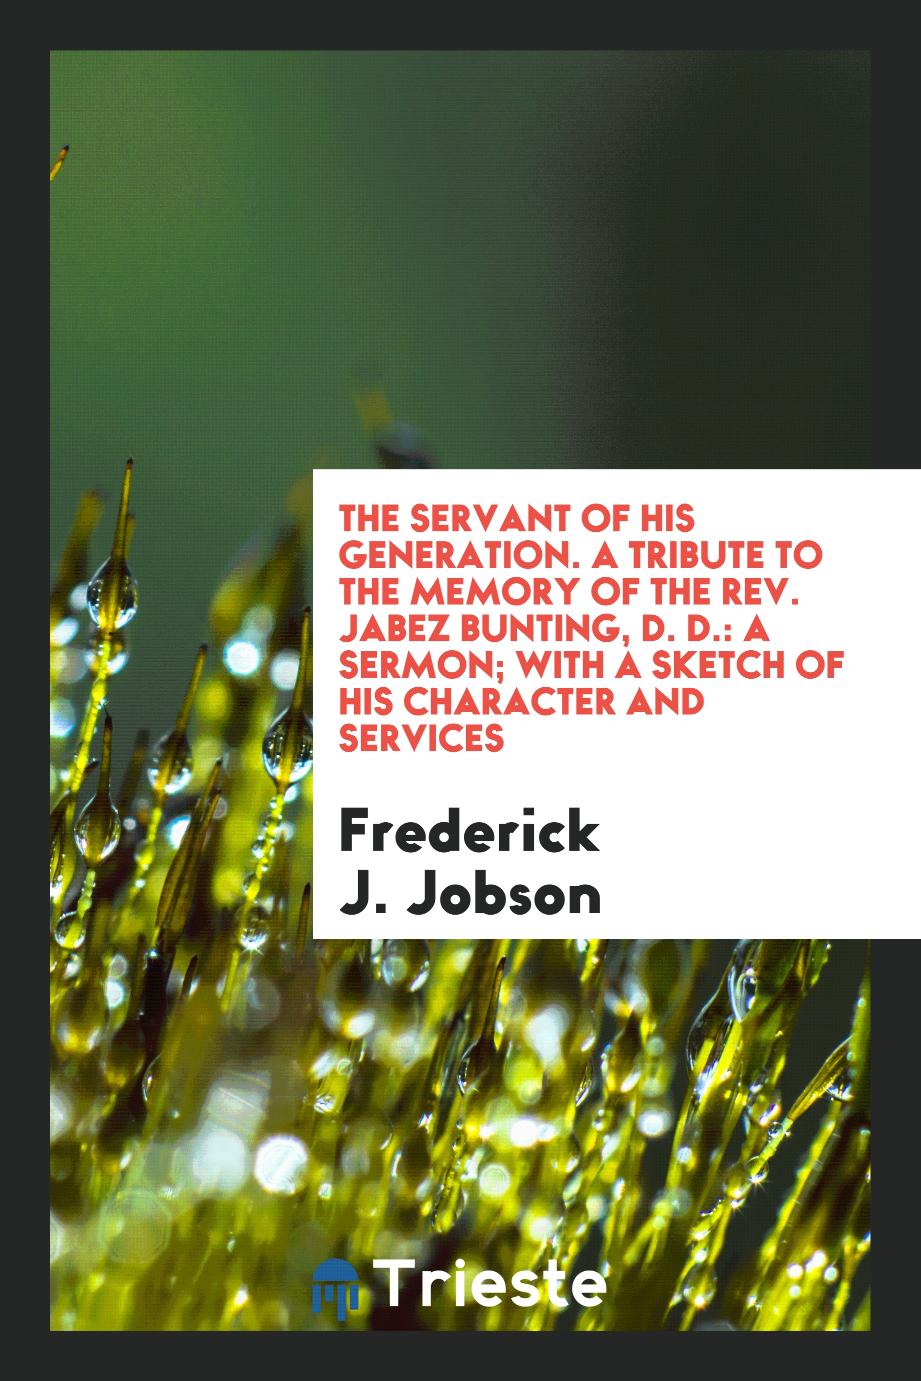 The Servant of His Generation. A Tribute to the Memory of the Rev. Jabez Bunting, D. D.: A Sermon; With a Sketch of His Character and Services